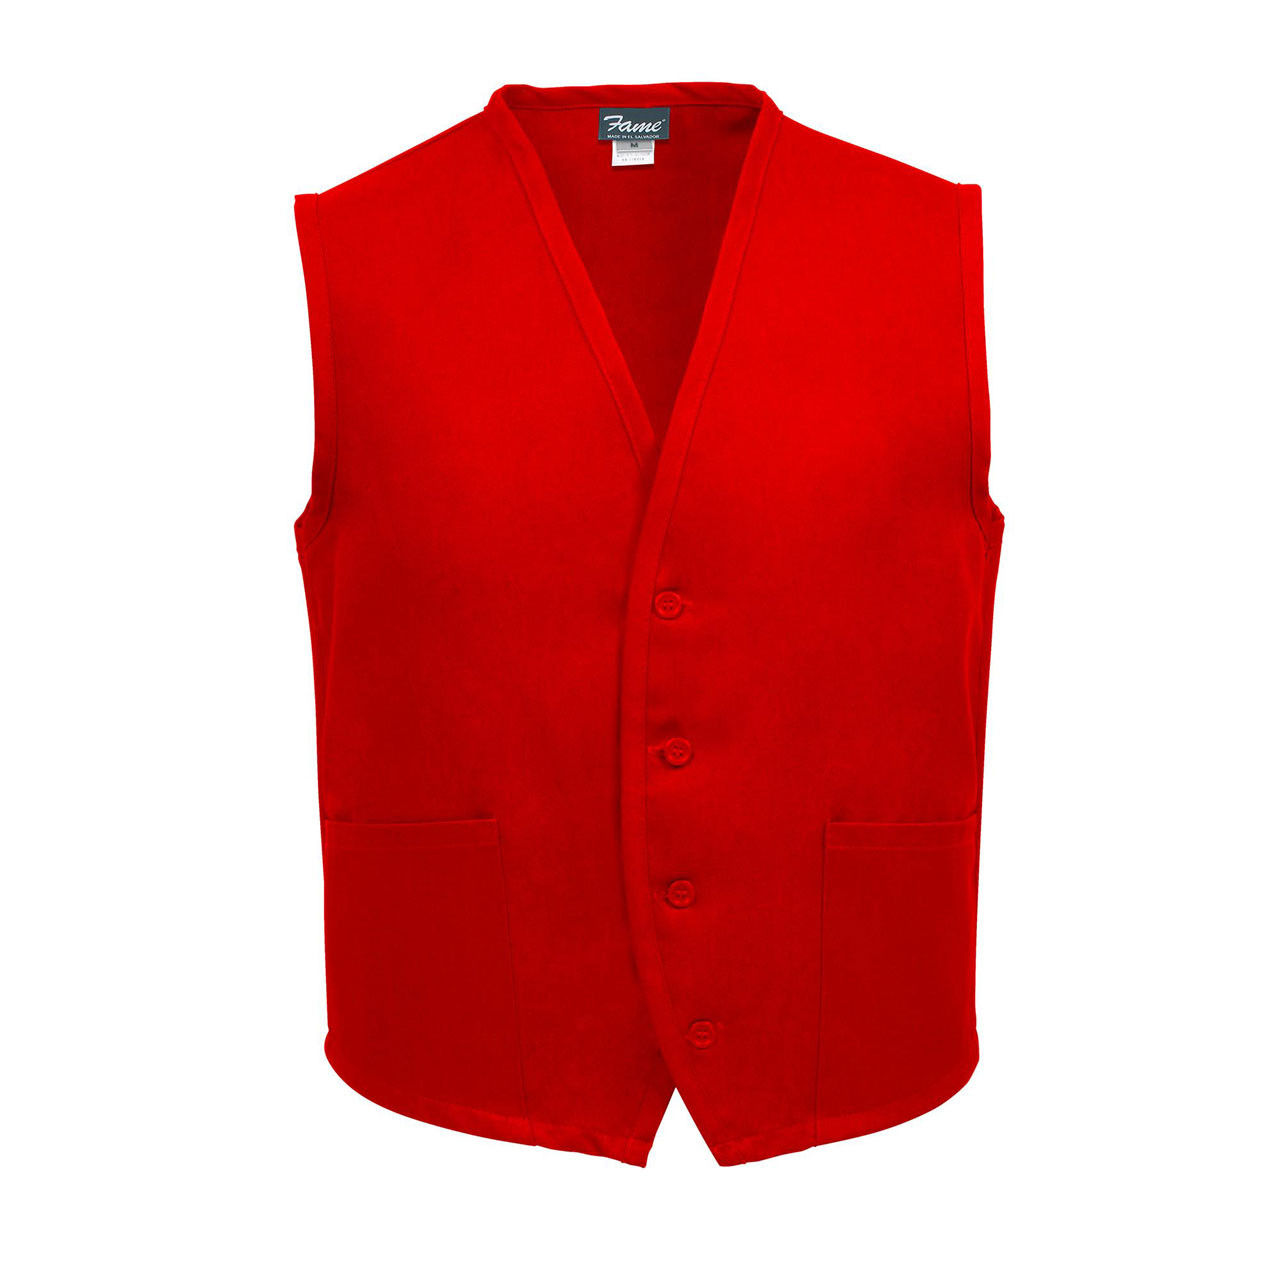 What is the design of the closure on the red vest?